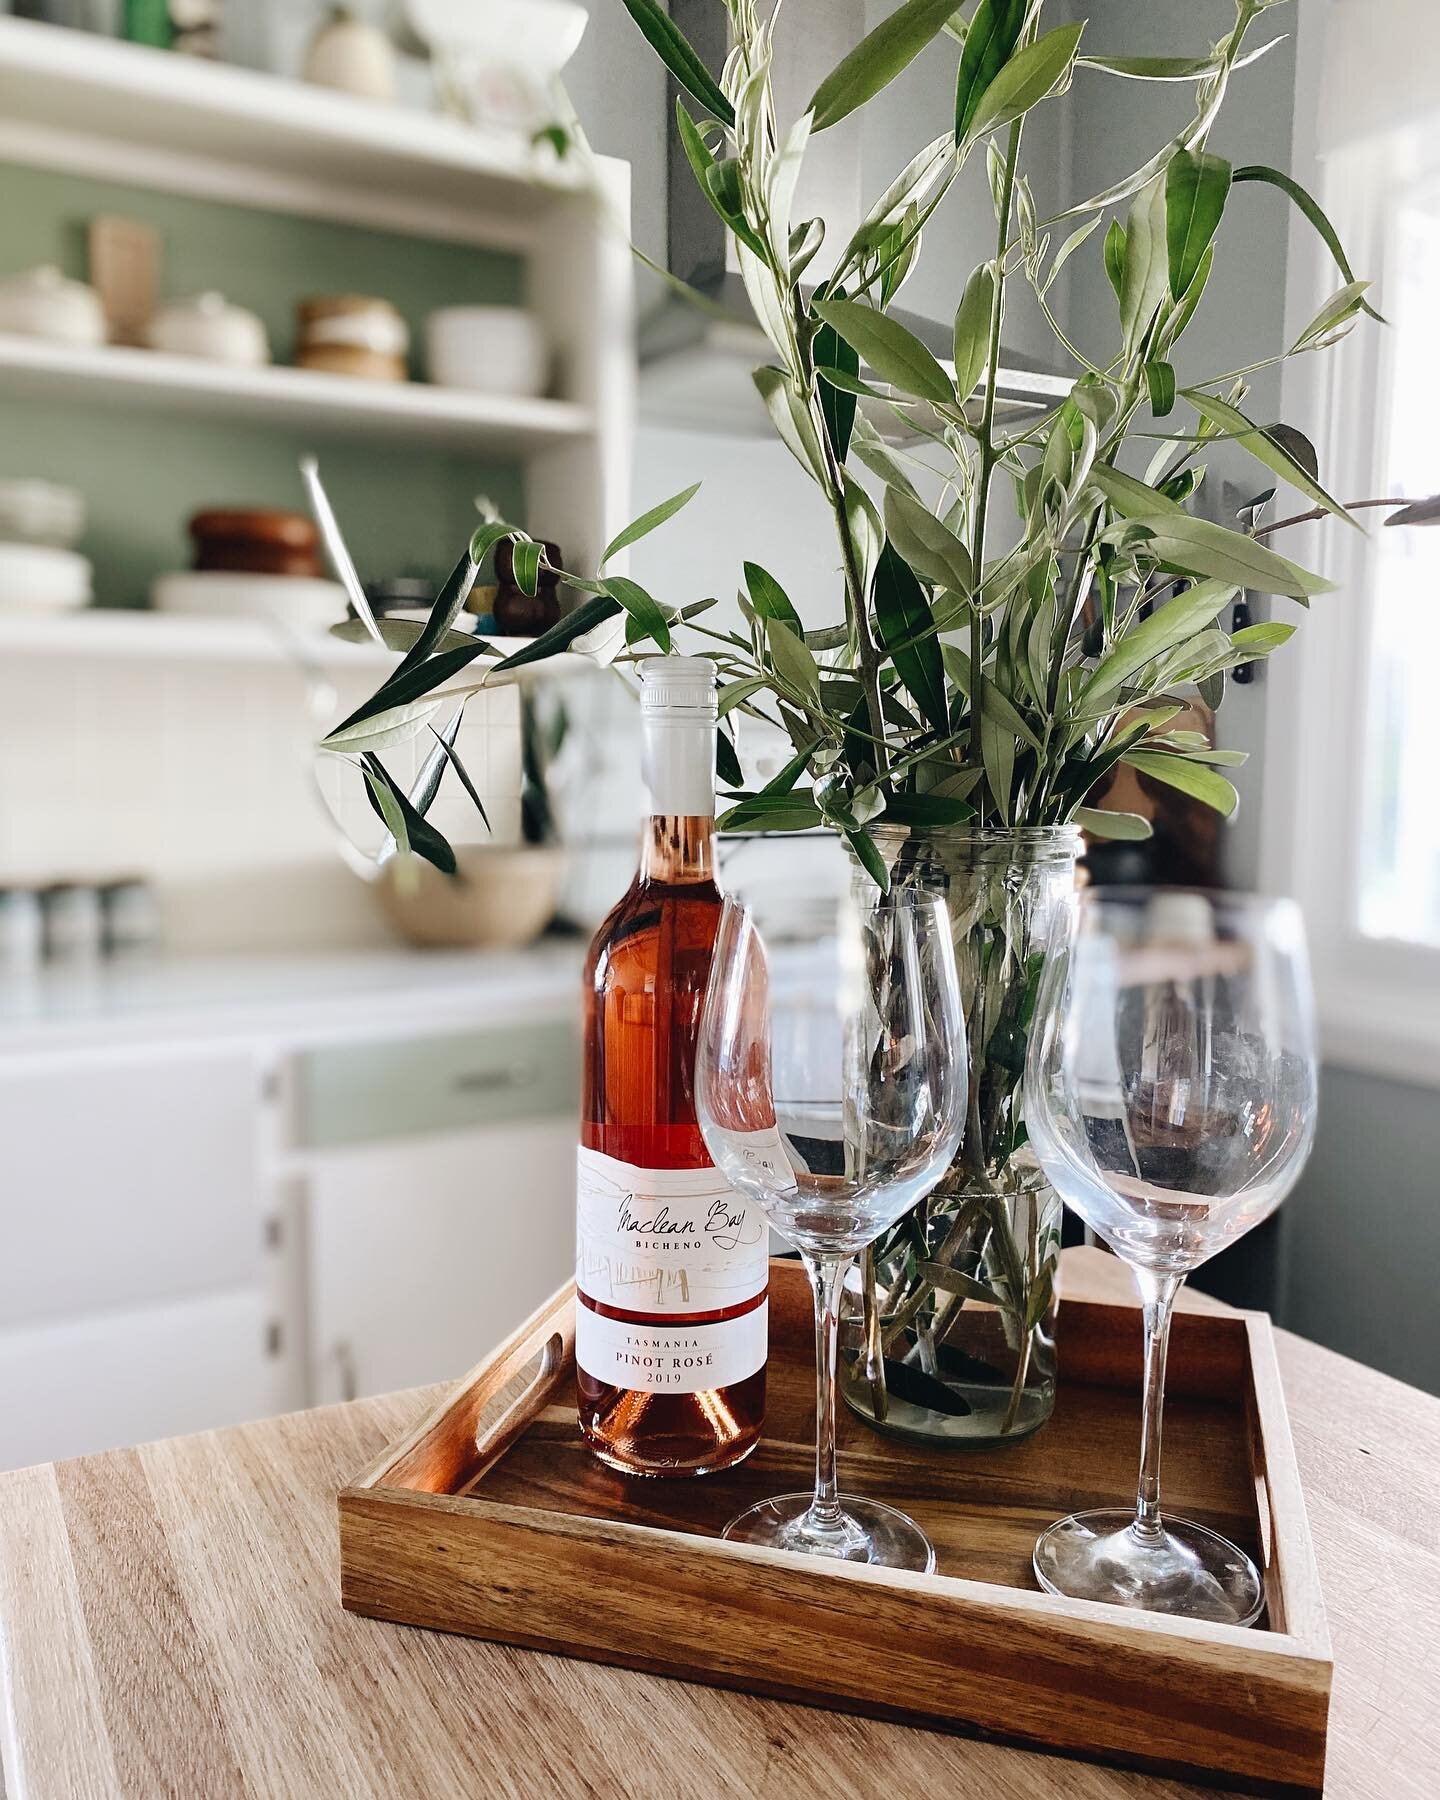 W E L C O M E

I love picking greens from the garden and popping them in some fresh water, ready for guests to enjoy - and off course a delicious bottle of local wine from @macleanbaywines to go with 🤍